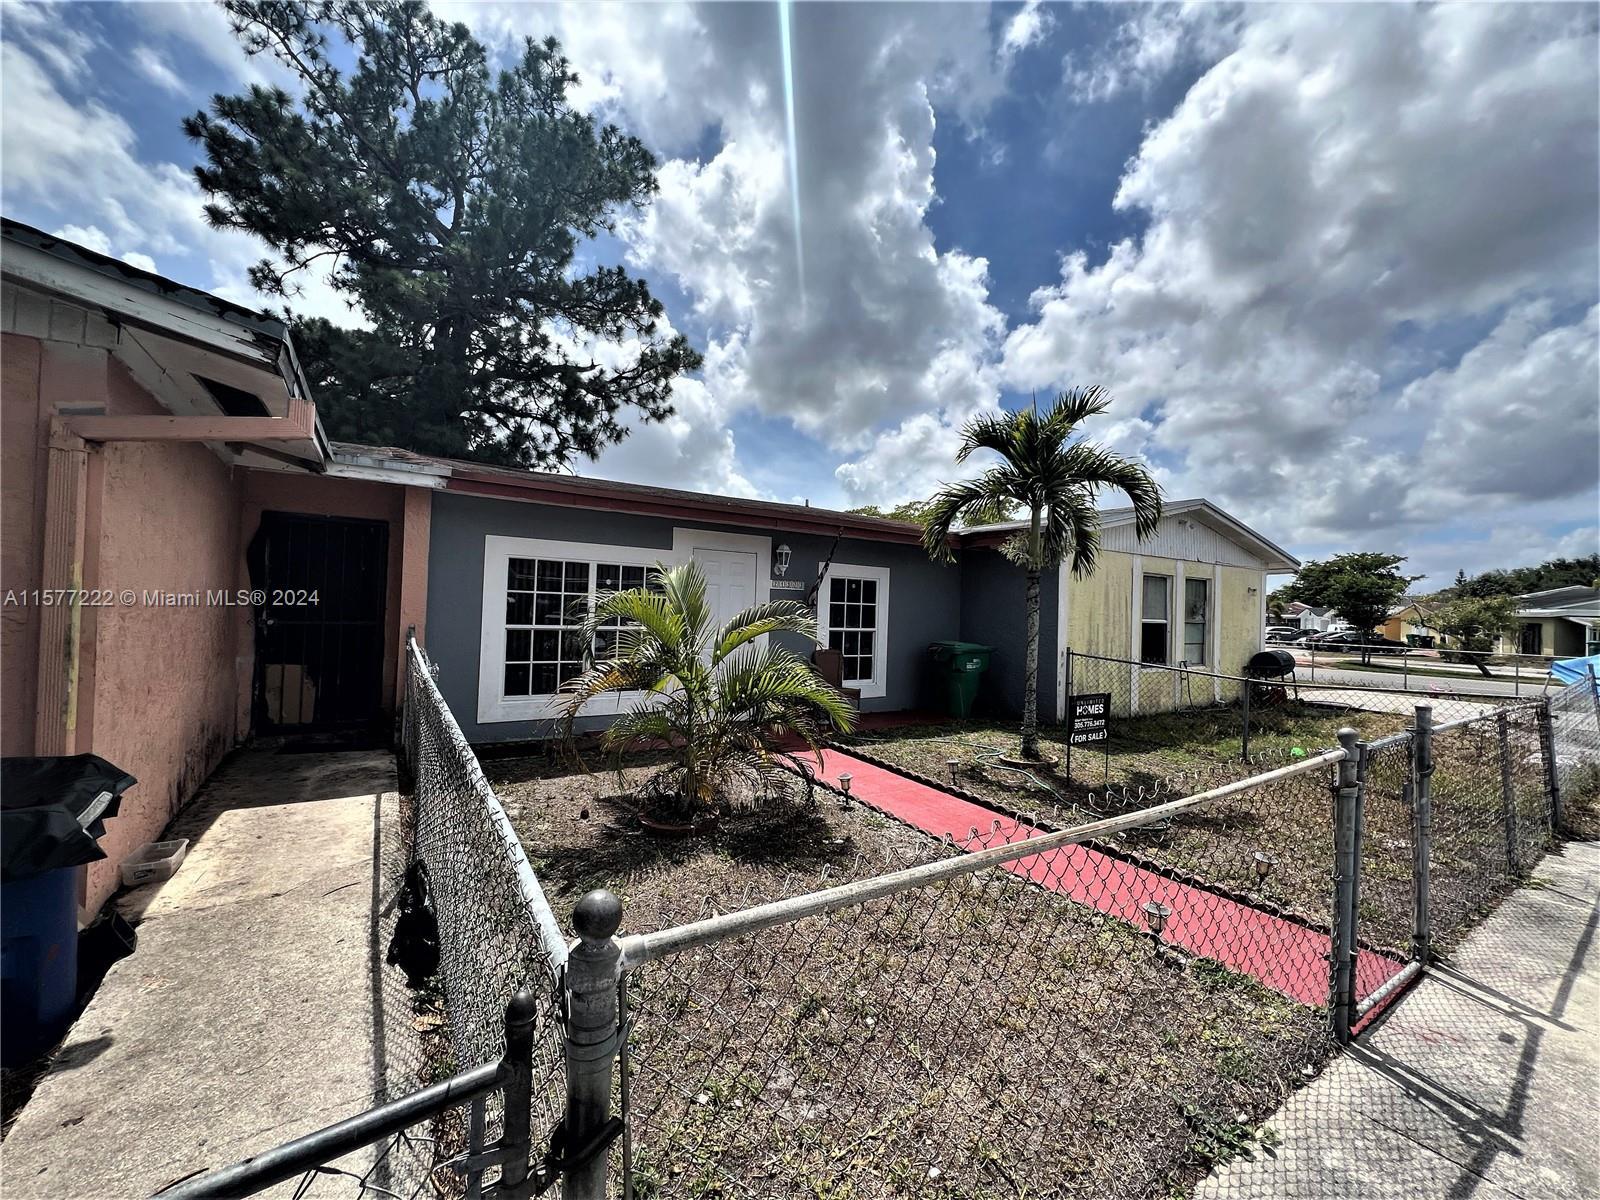 Photo of 21303 NW 39th Ave in Miami Gardens, FL